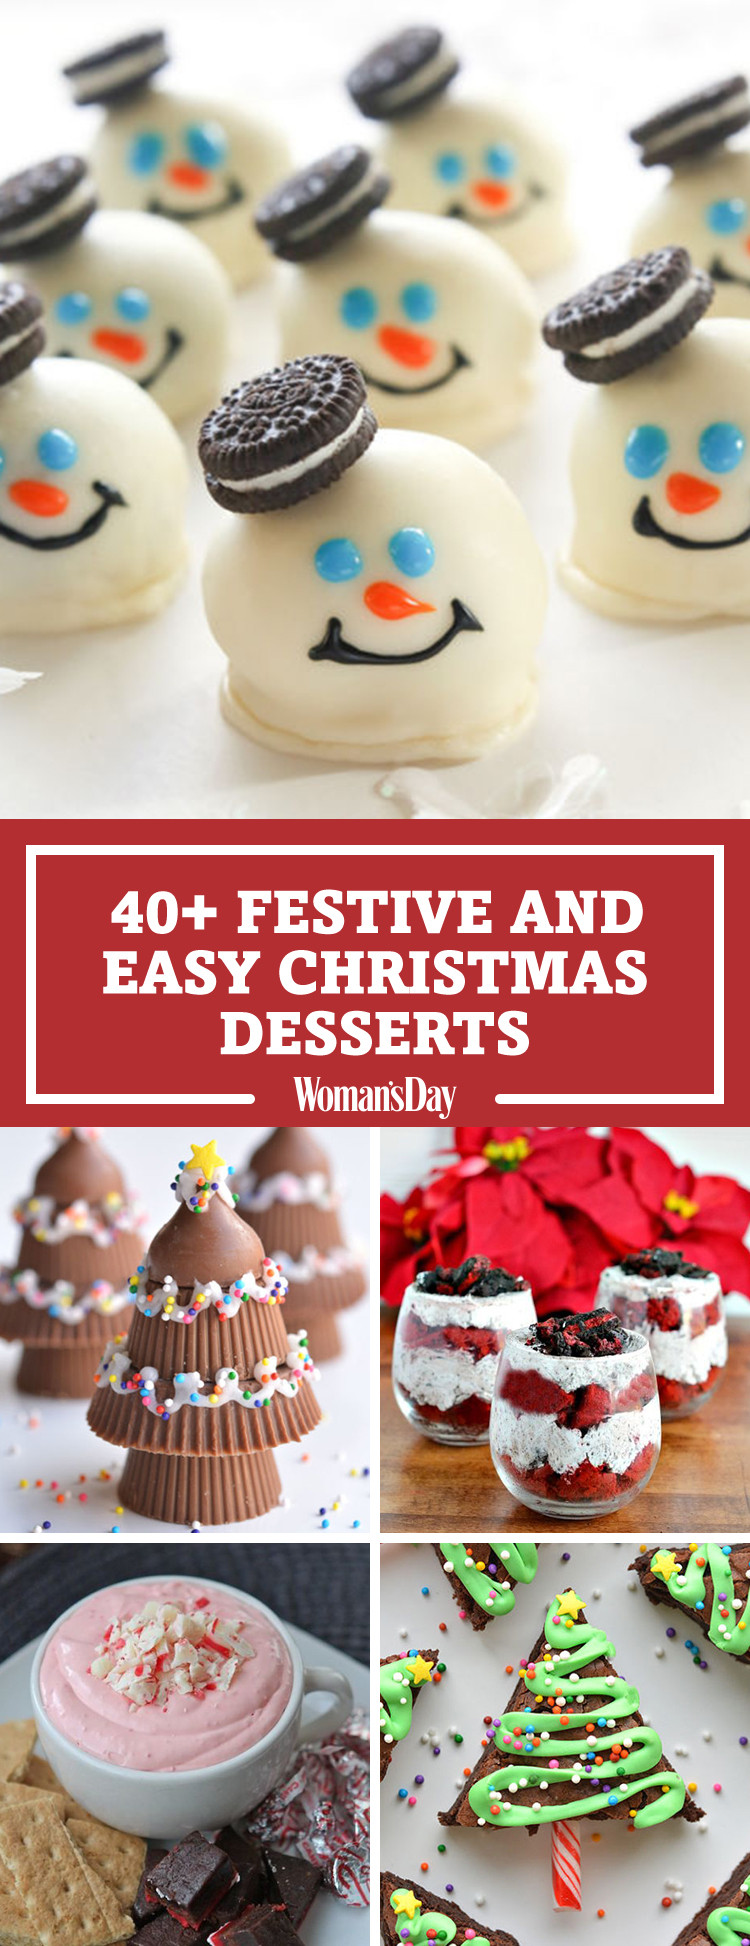 Desserts To Make For Christmas
 57 Easy Christmas Dessert Recipes Best Ideas for Fun